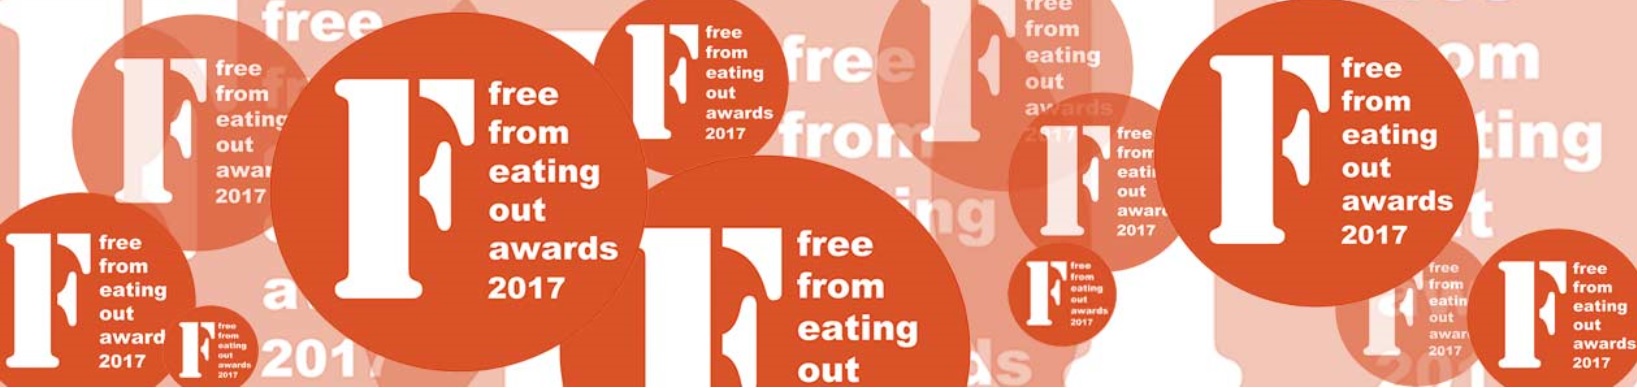 FFEO17 - Free From Eating Out Awards 2017. It's THE awards for restaurants, pubs, cafes etc to showcase their fantastic free from menus, and their understanding of allergies and cross contamination! www.intolerantgourmand.com 